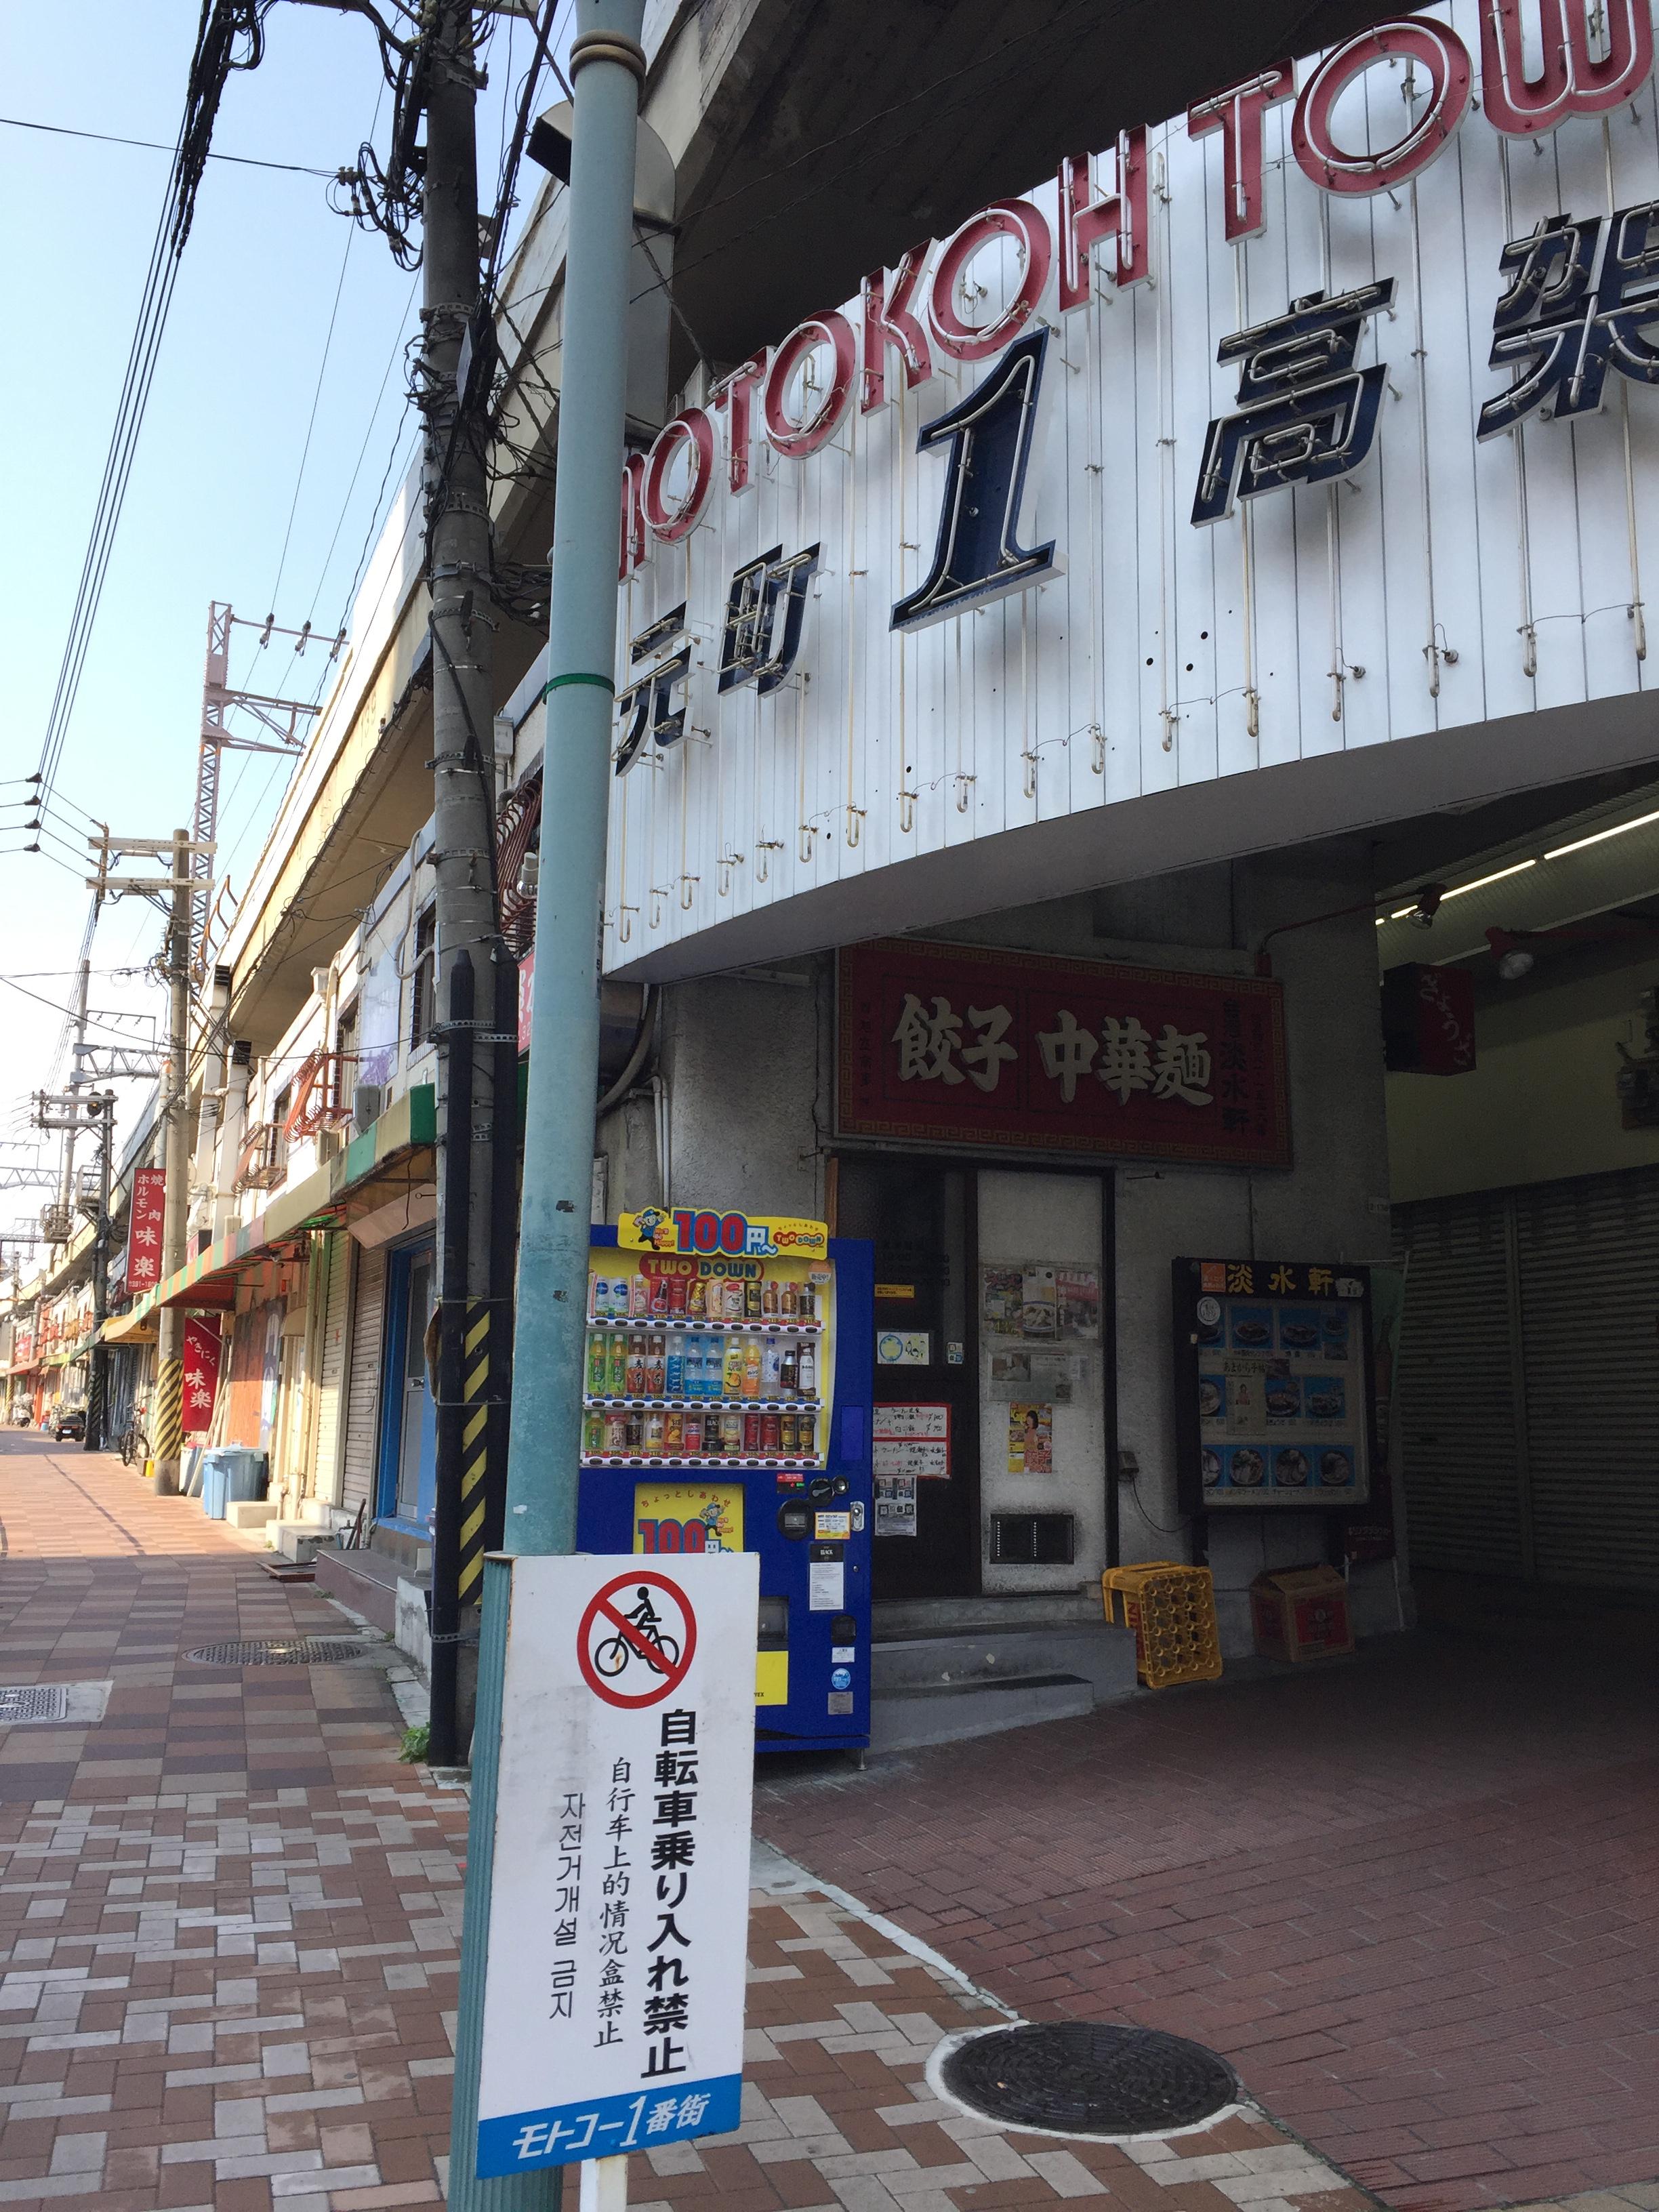 Cover image of this place モトコー１ (Motoko shopping arcade)